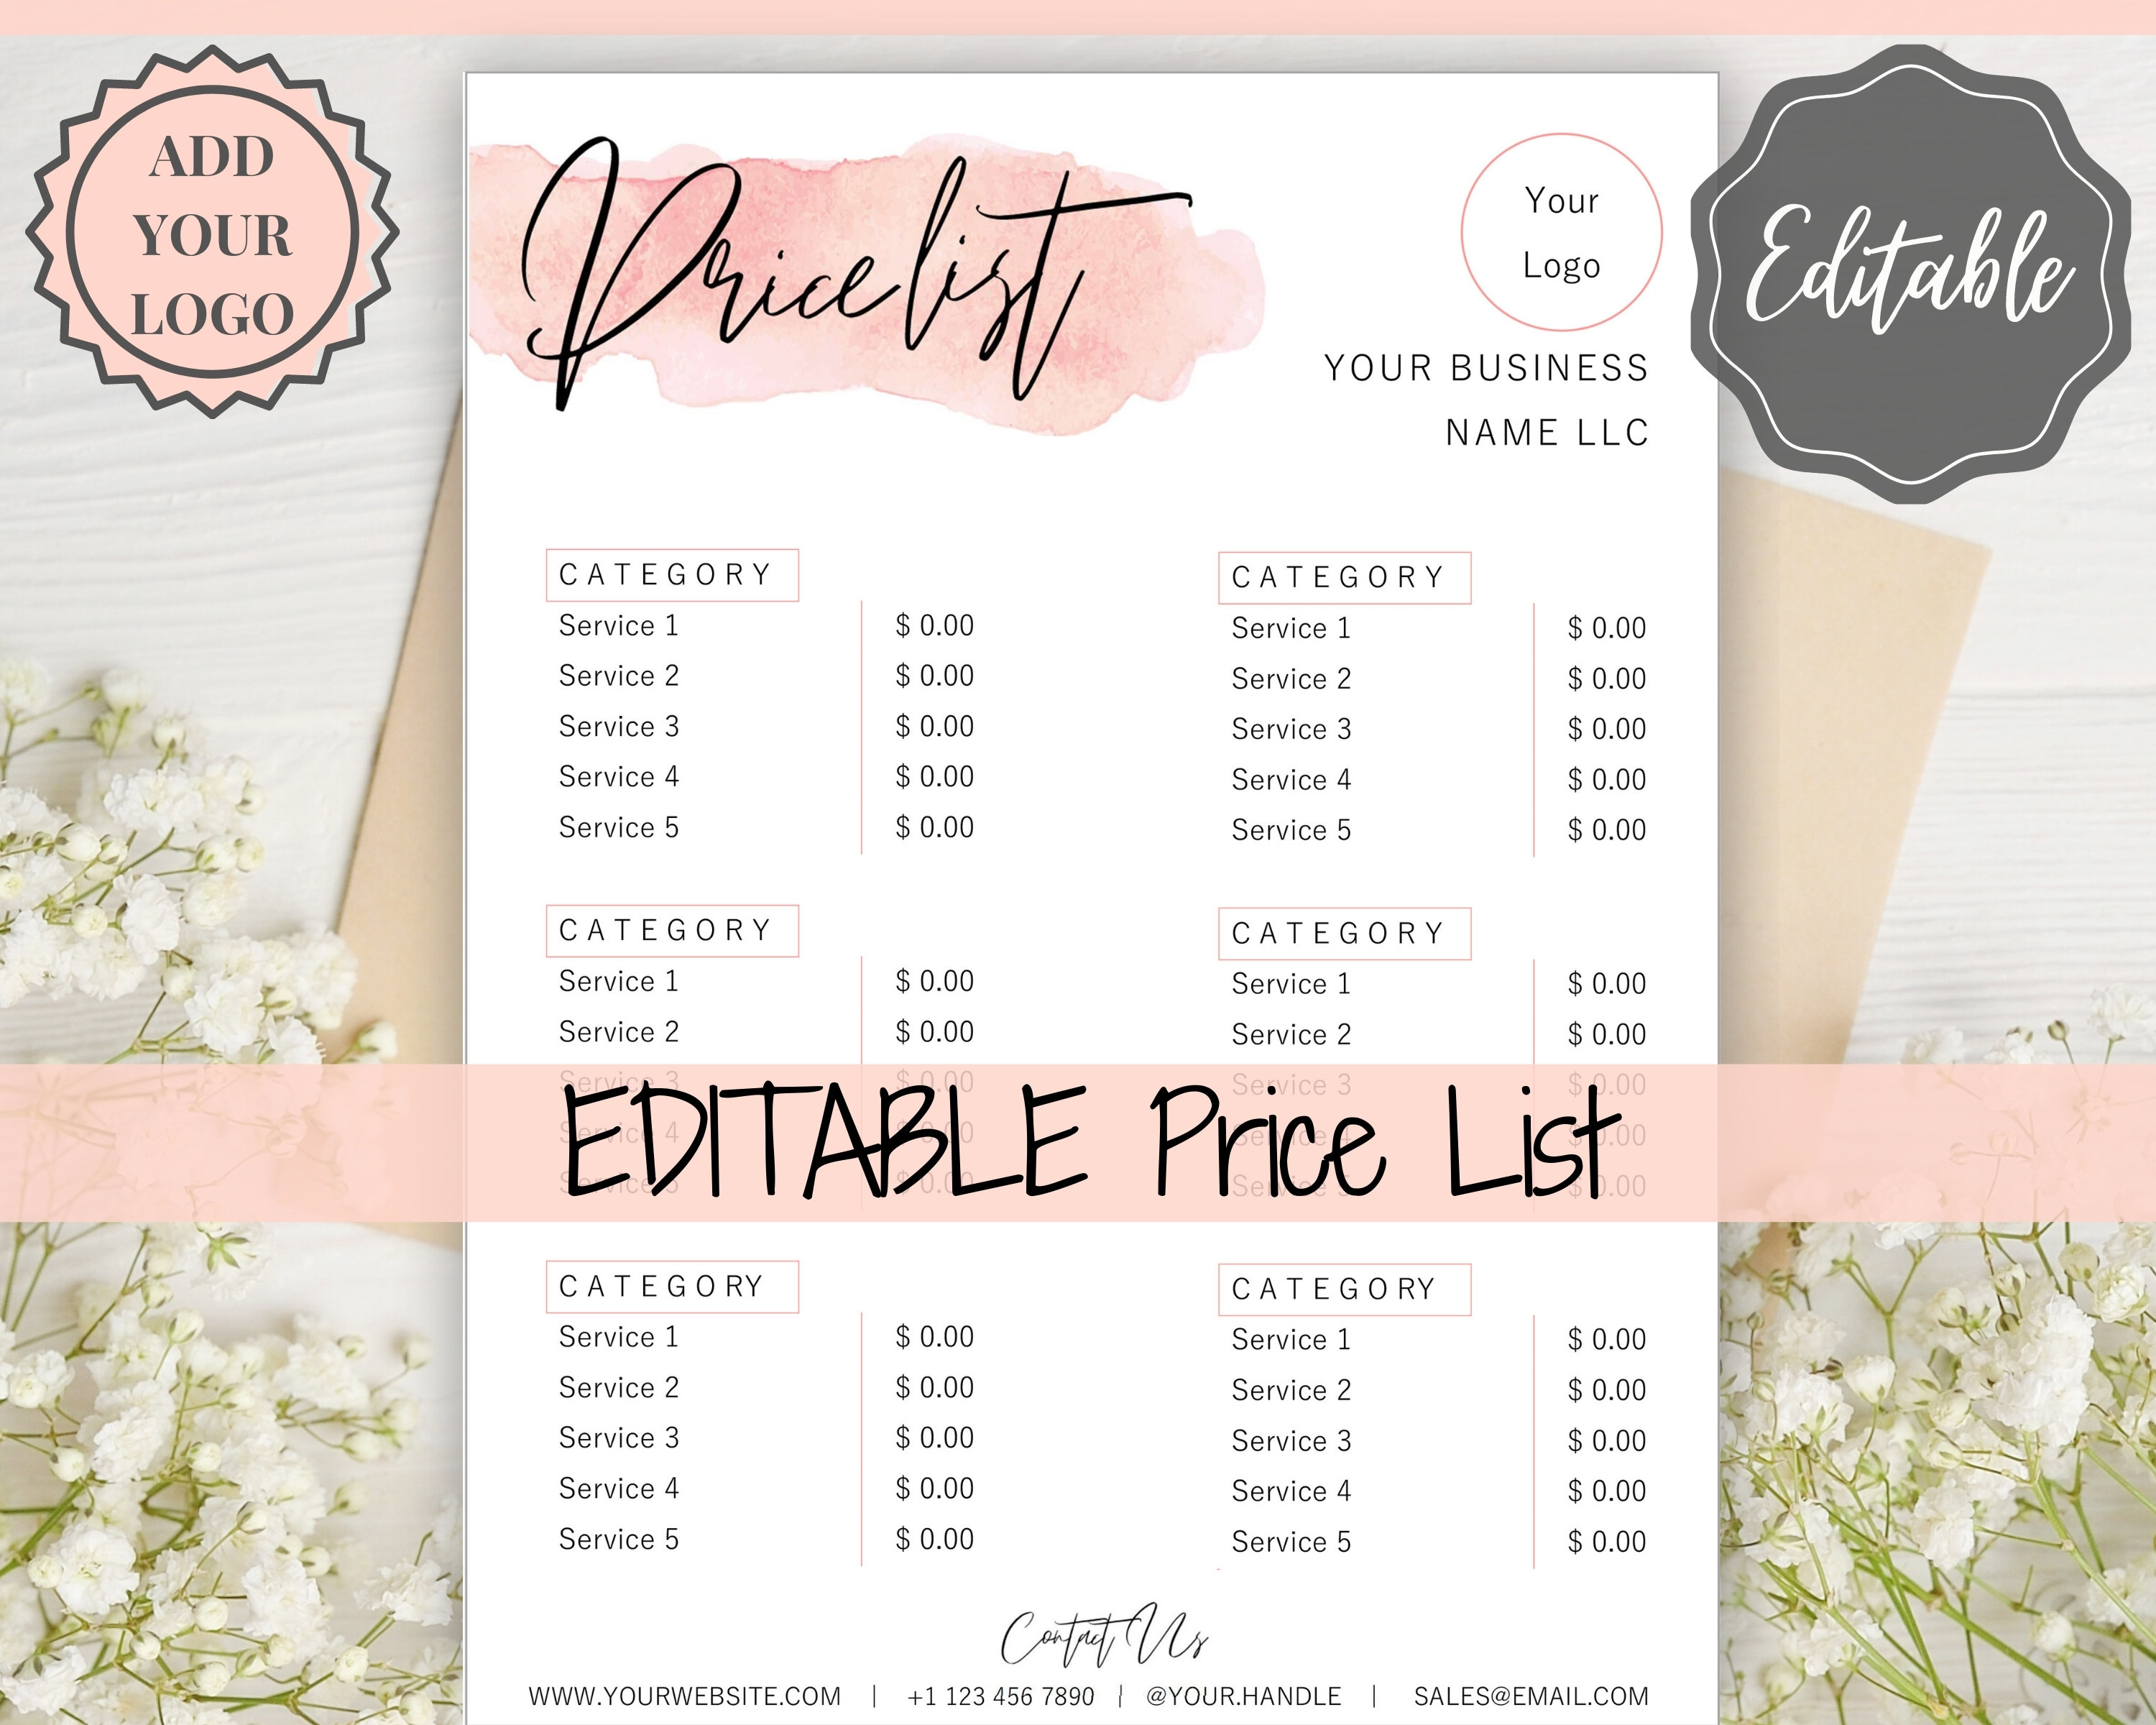 Price List Template - Free Vectors & PSDs to Download